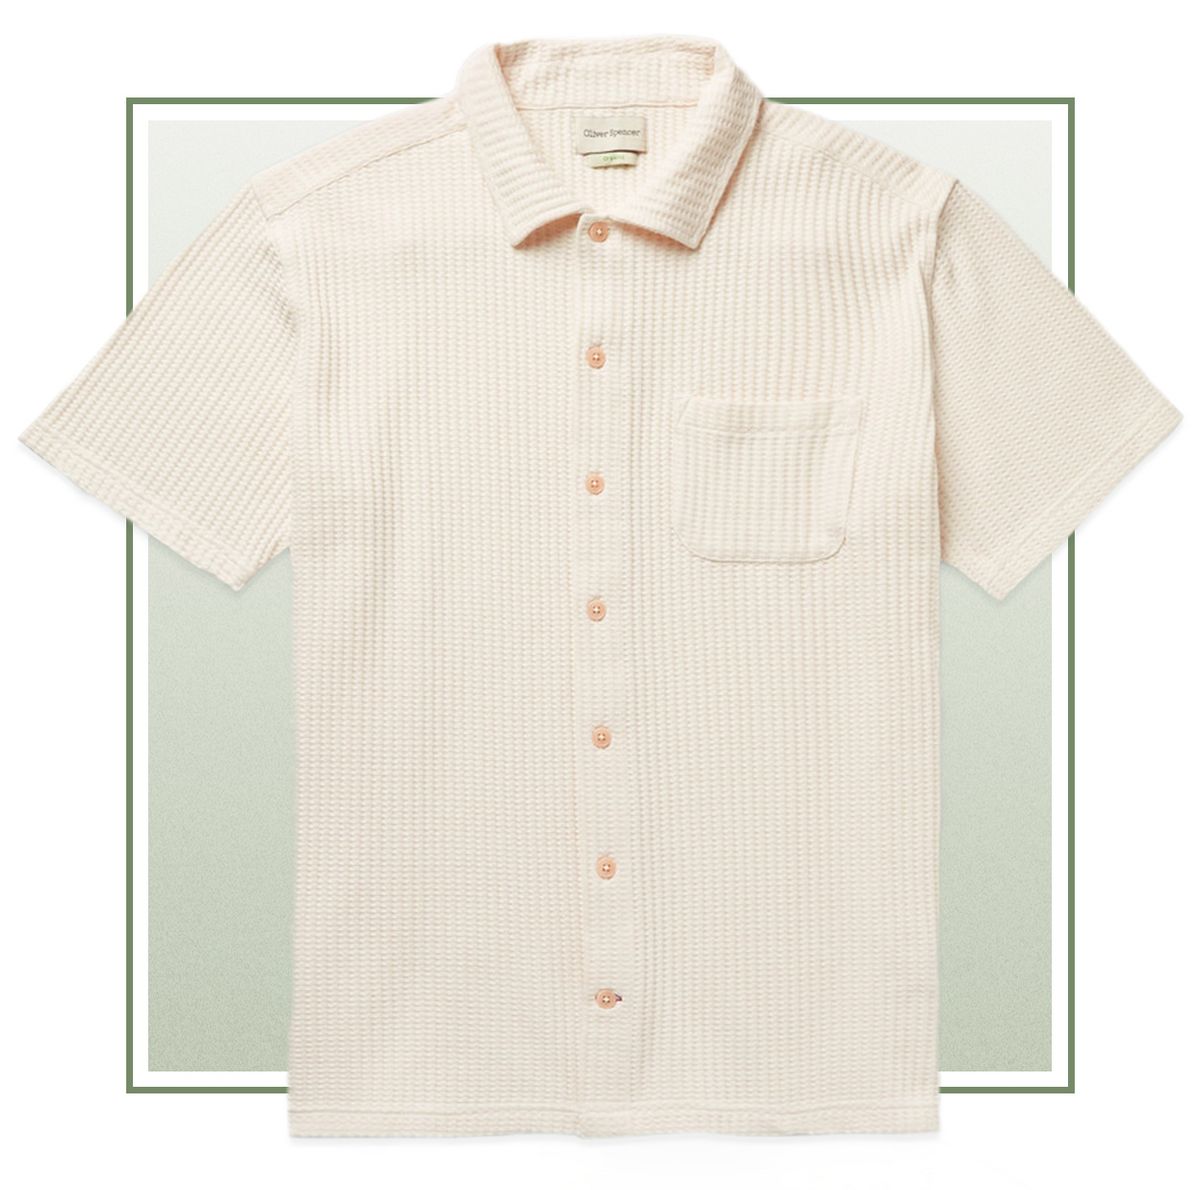 Every Short-Sleeved Shirt You’ll Need This Glorious Summer | The ...